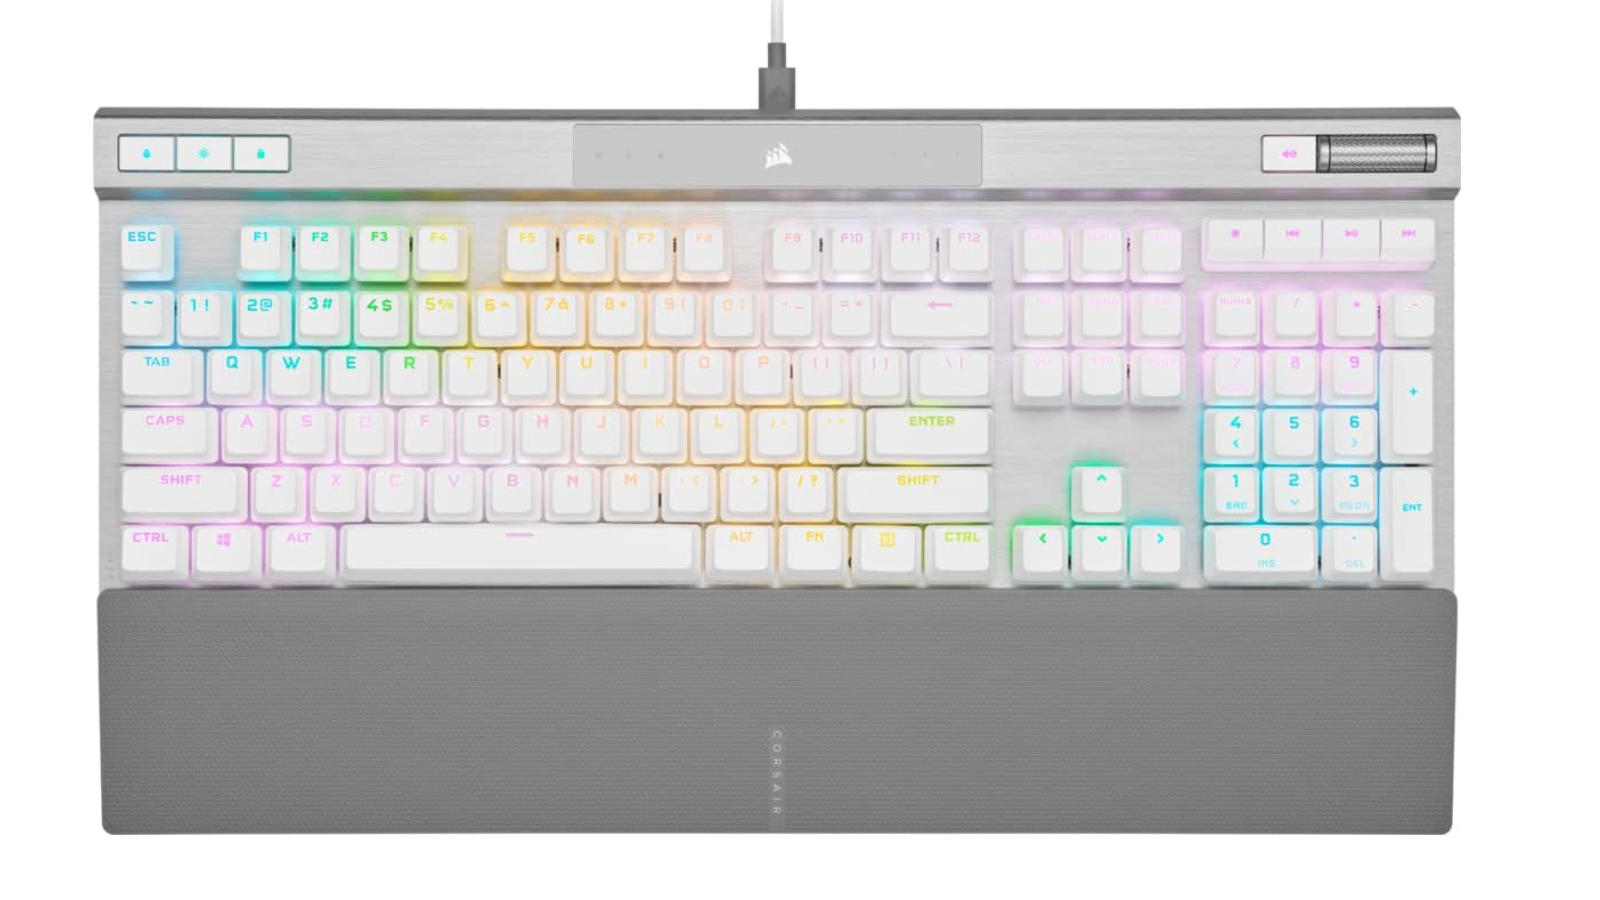 Corsair K70 Pro RGB gaming keyboard in white against a white background.